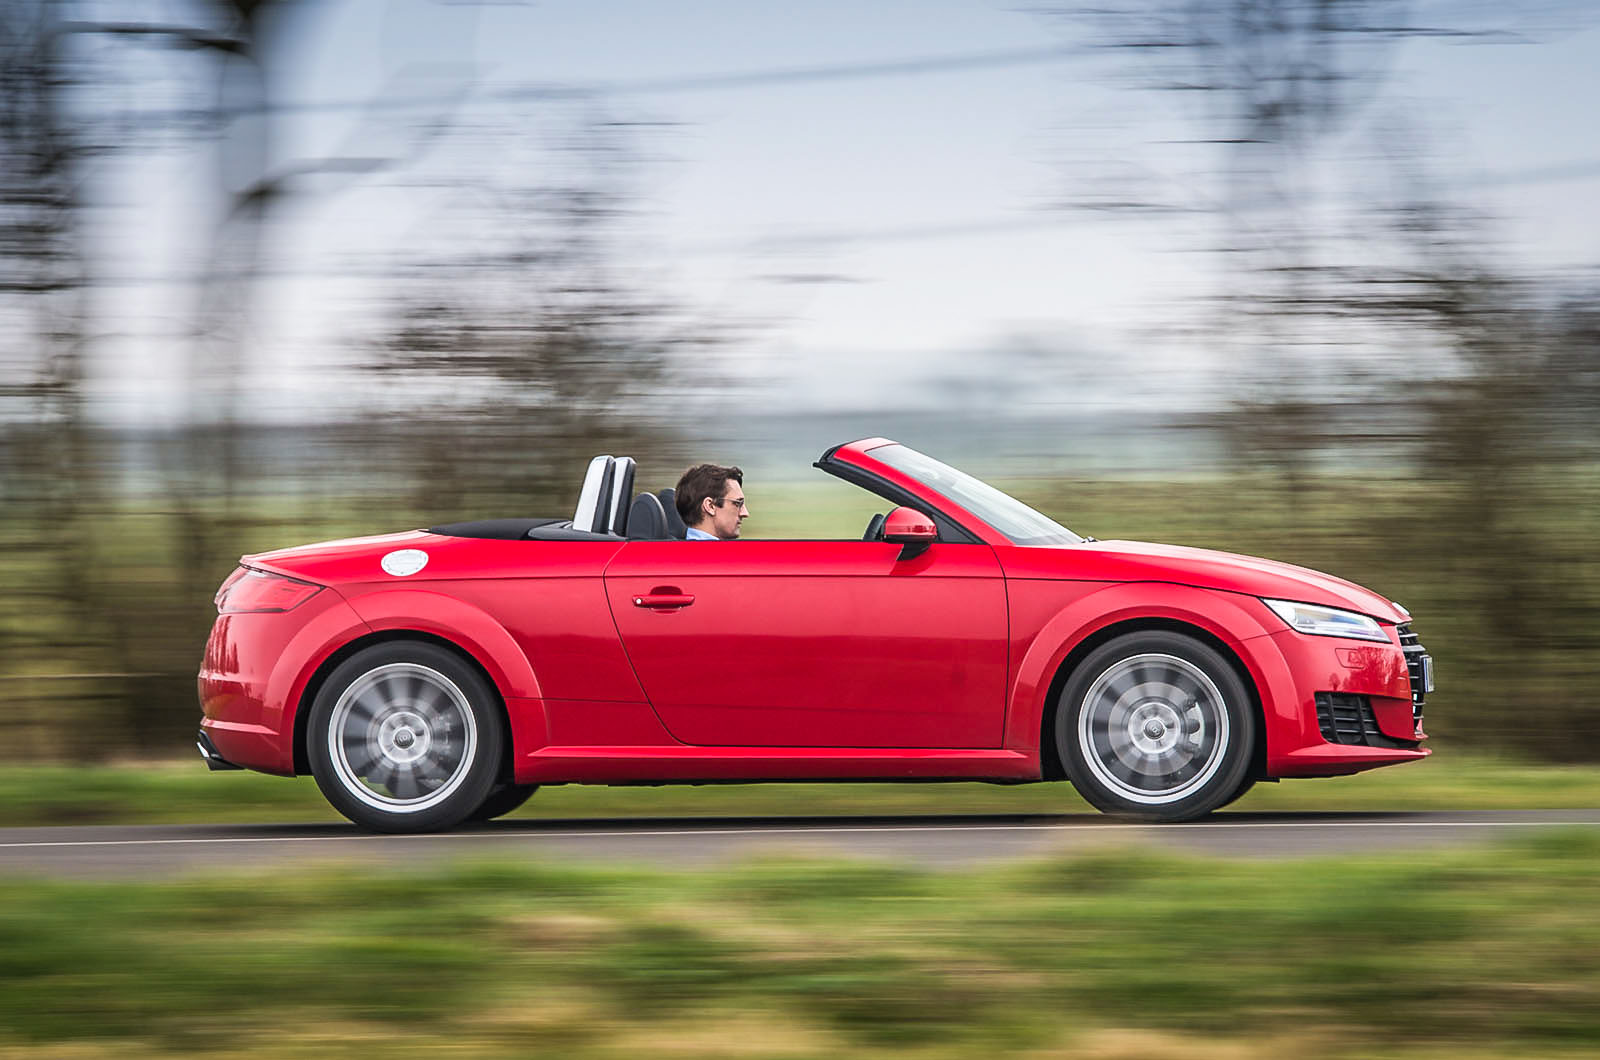 Audi TT Roadster can come with Quattro